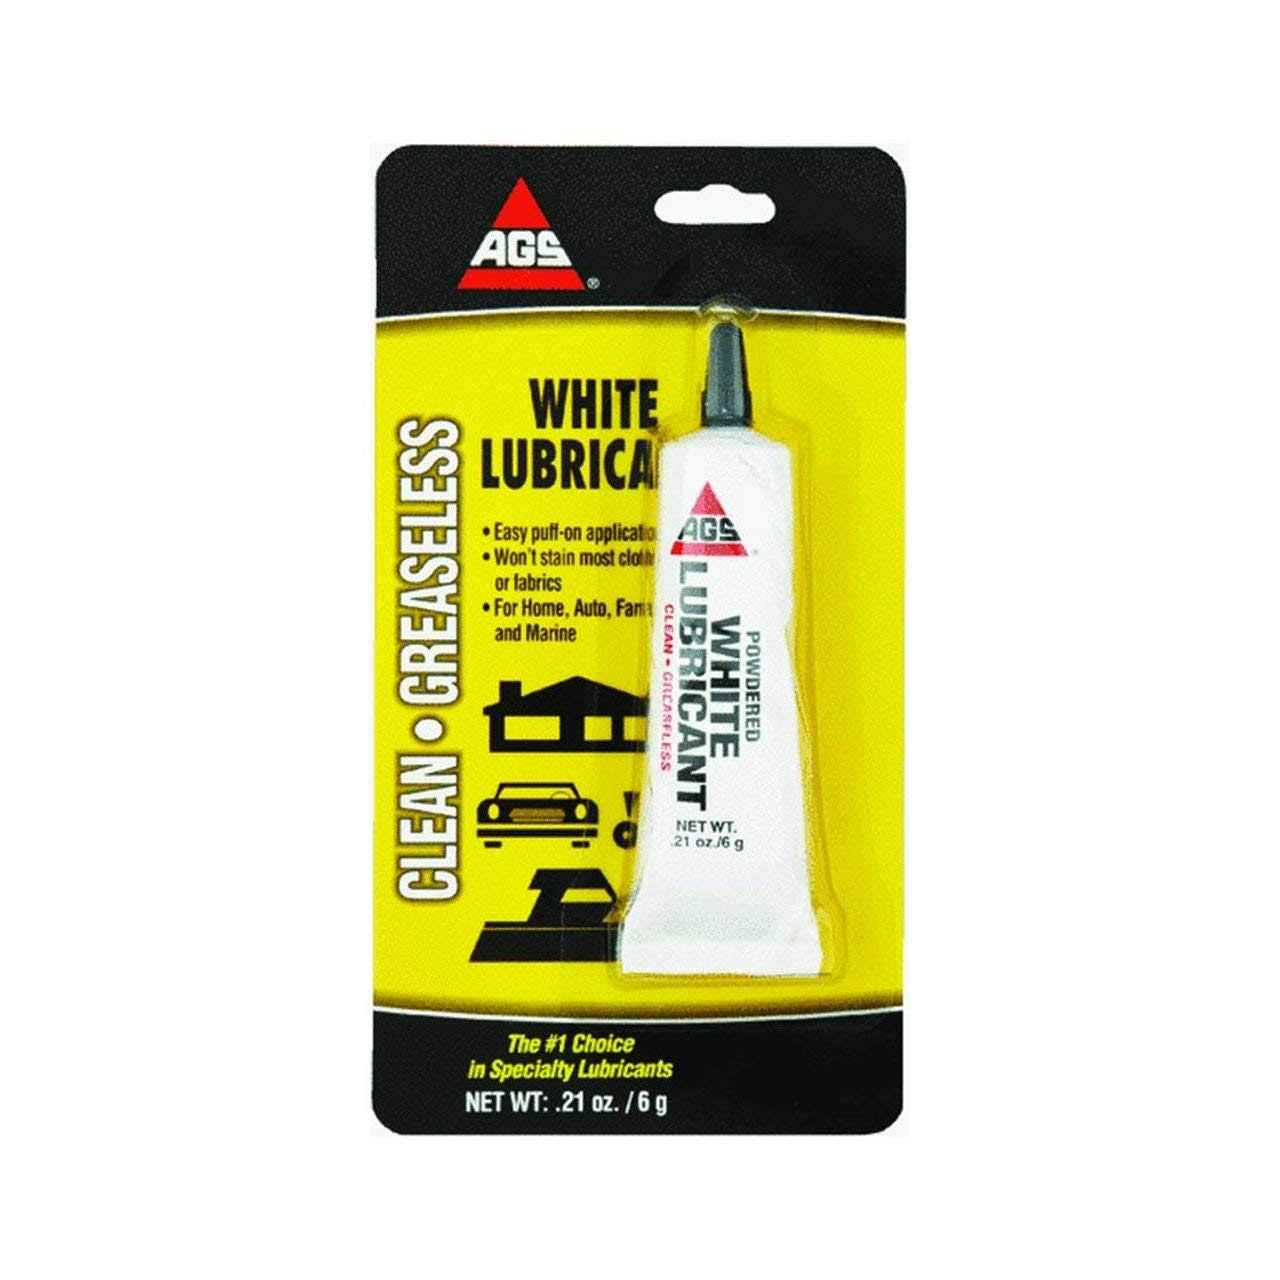 Ags Powdered White Lubricant - 6g